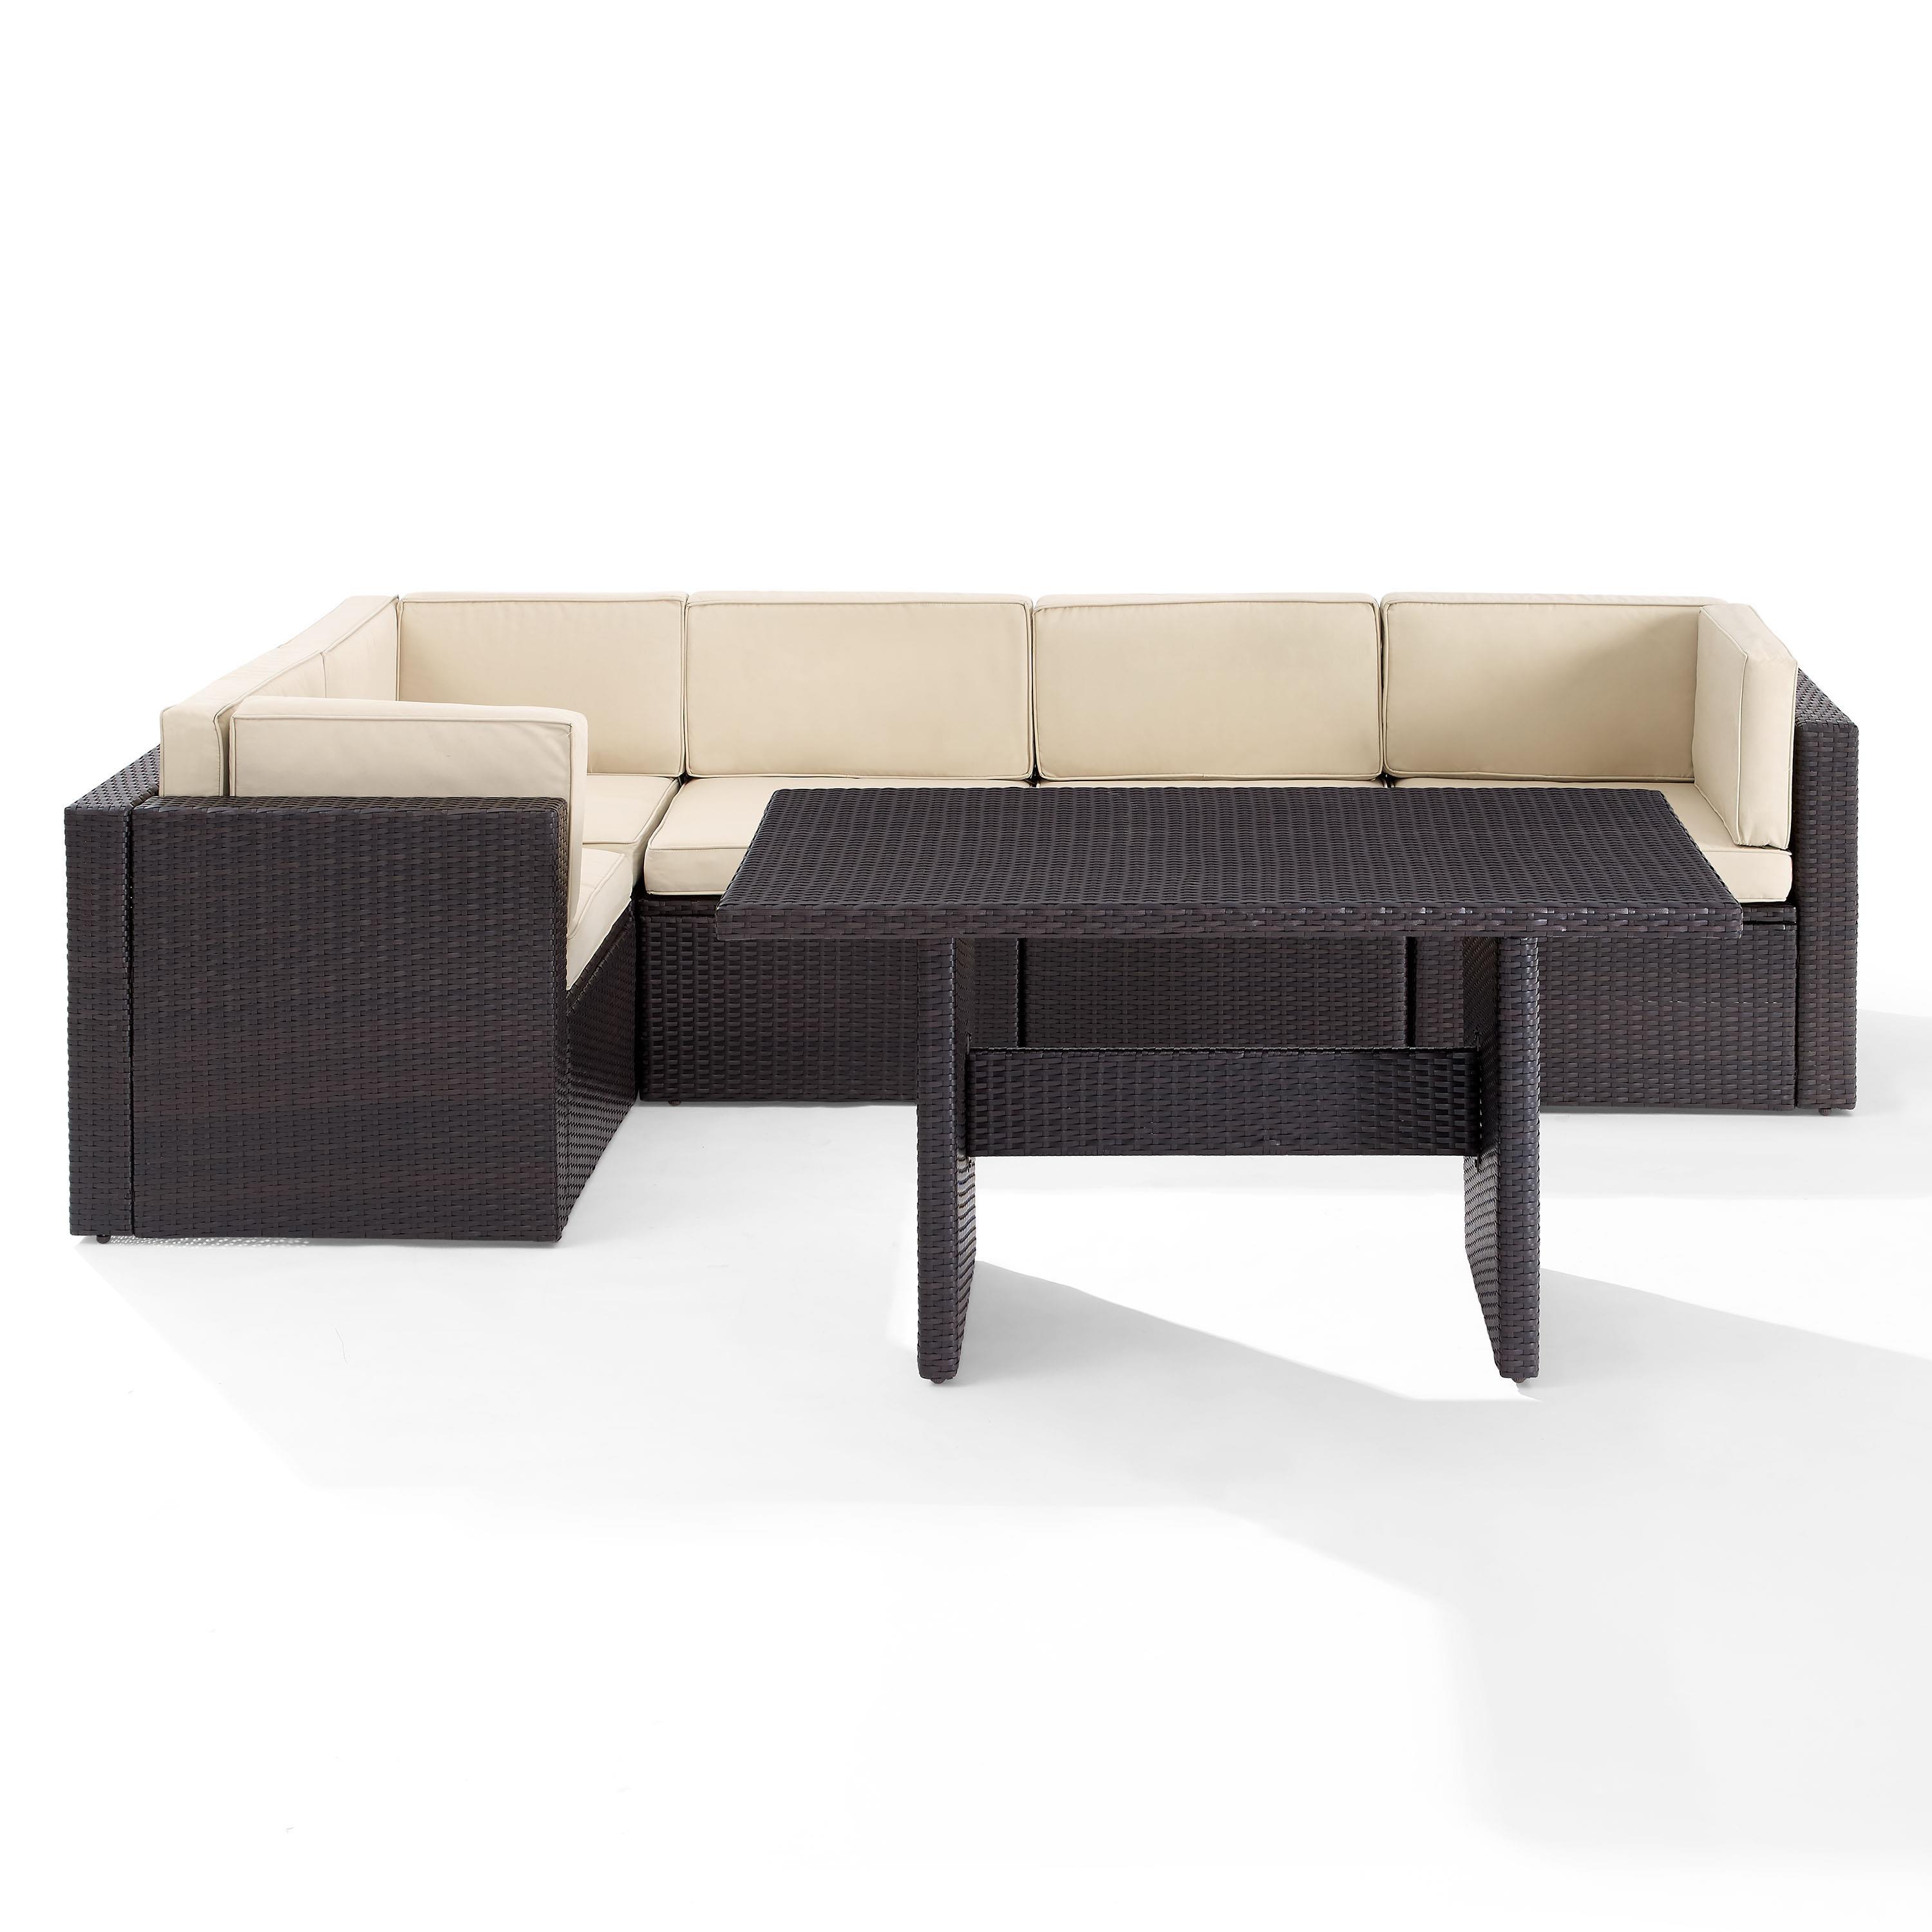 Crosley Palm Harbor 6Pc Outdoor Wicker Sectional Set- 3 Corner Chairs, 2 Center Chairs, Cocktail Table - image 2 of 10